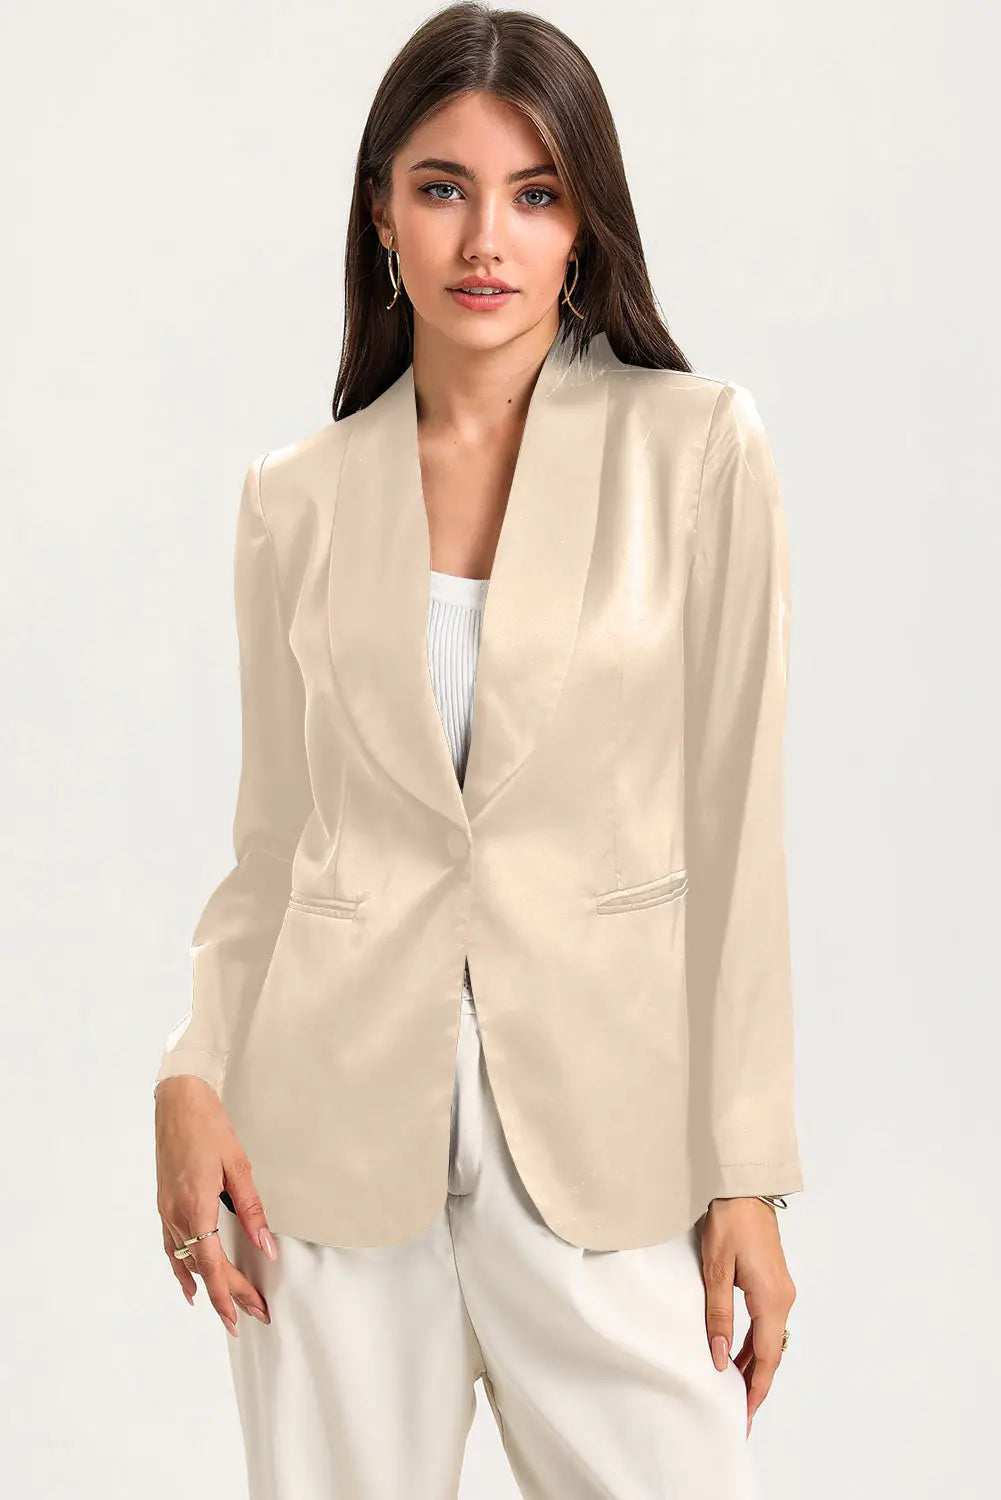 Black collared neck single breasted blazer with pockets - apricot / s / 90% polyester + 10% elastane - blazers